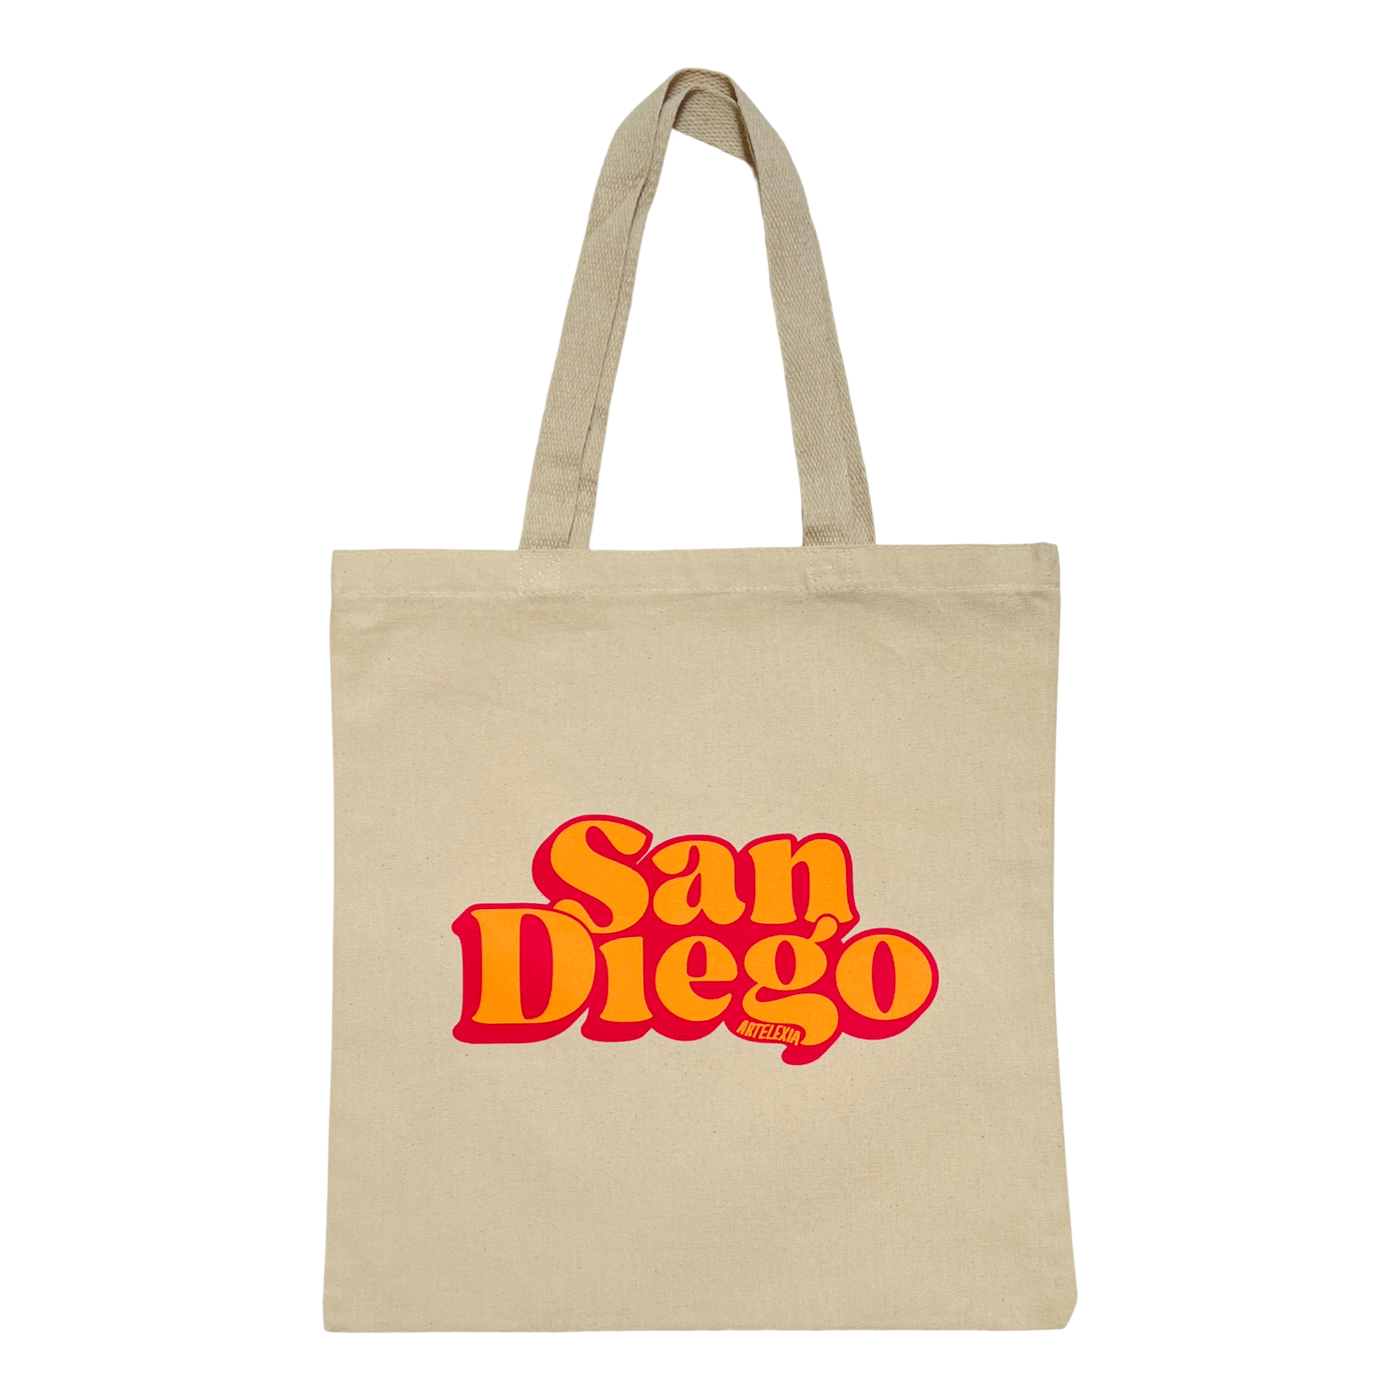 Biege canvas tote bag with the name San Diego in orange and pink lettering